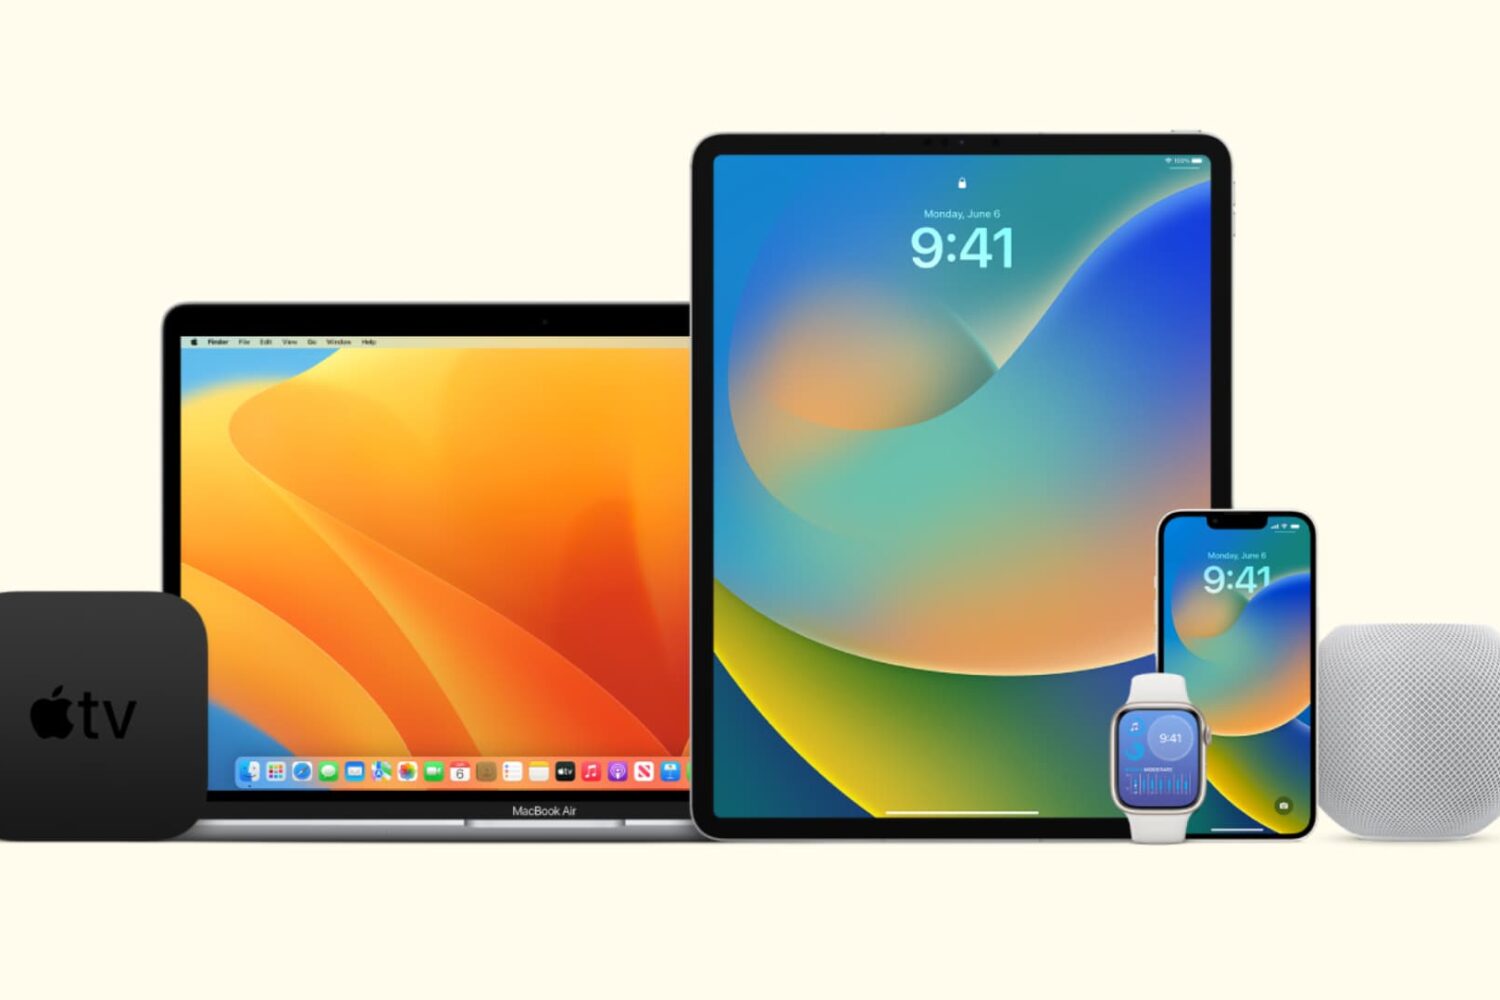 iPhone, iPad, MacBook, Apple Watch, Apple TV, and HomePod kept near each other